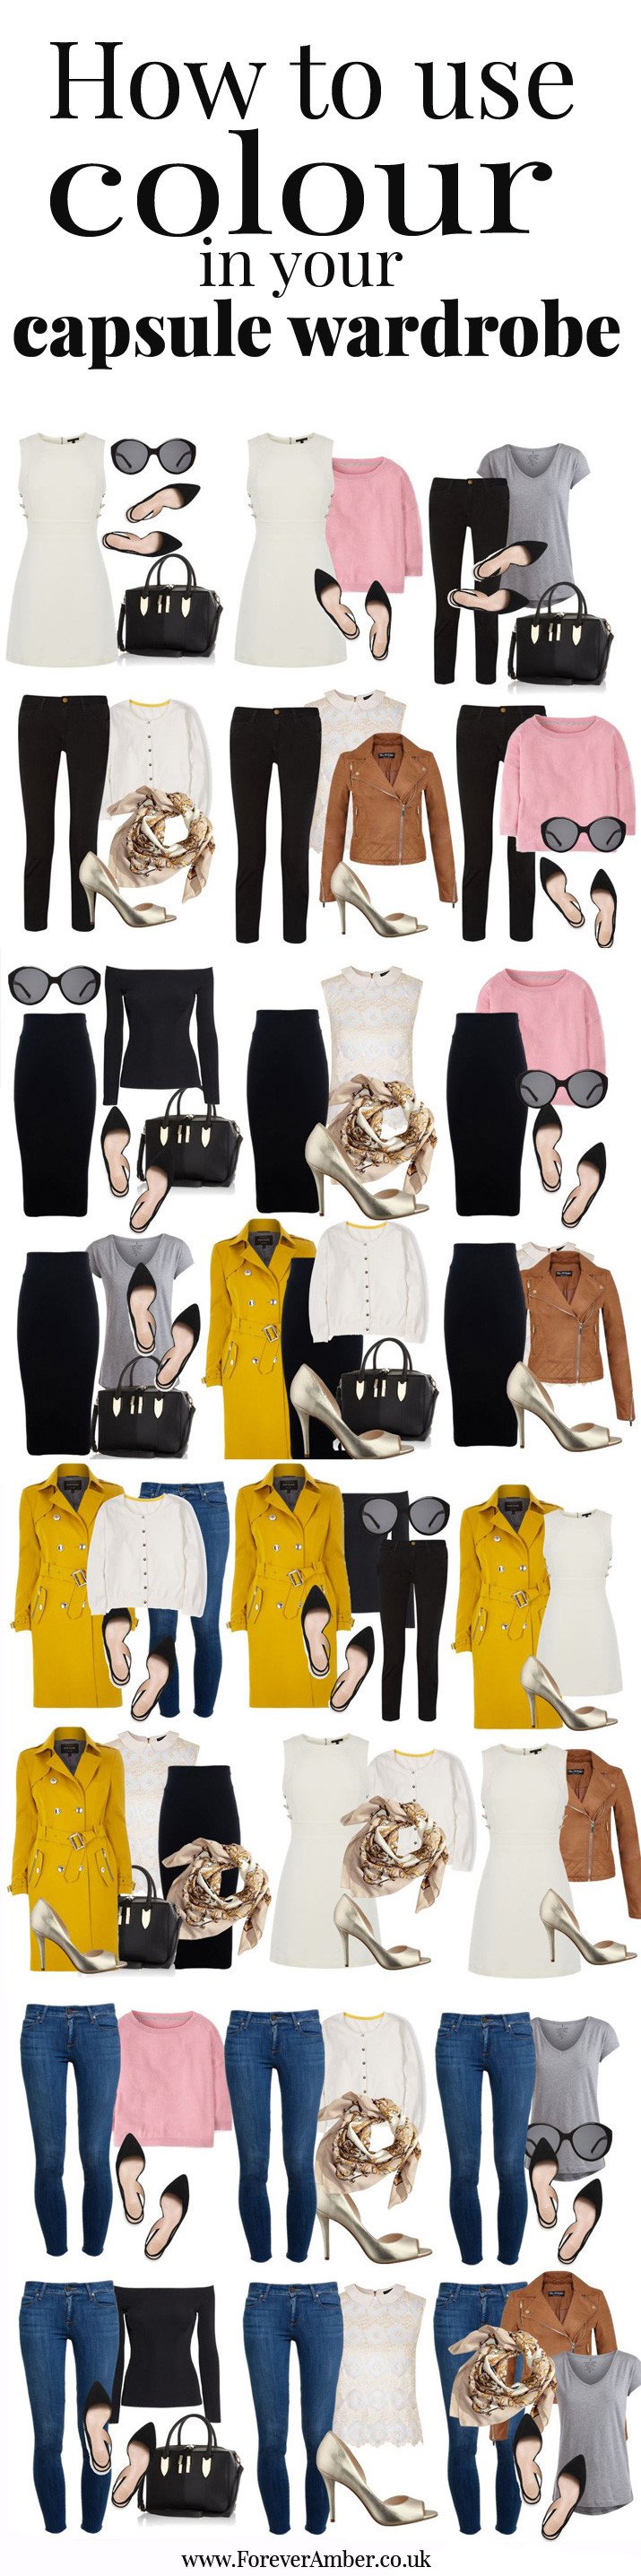 how to use colour in your capsule wardrobe